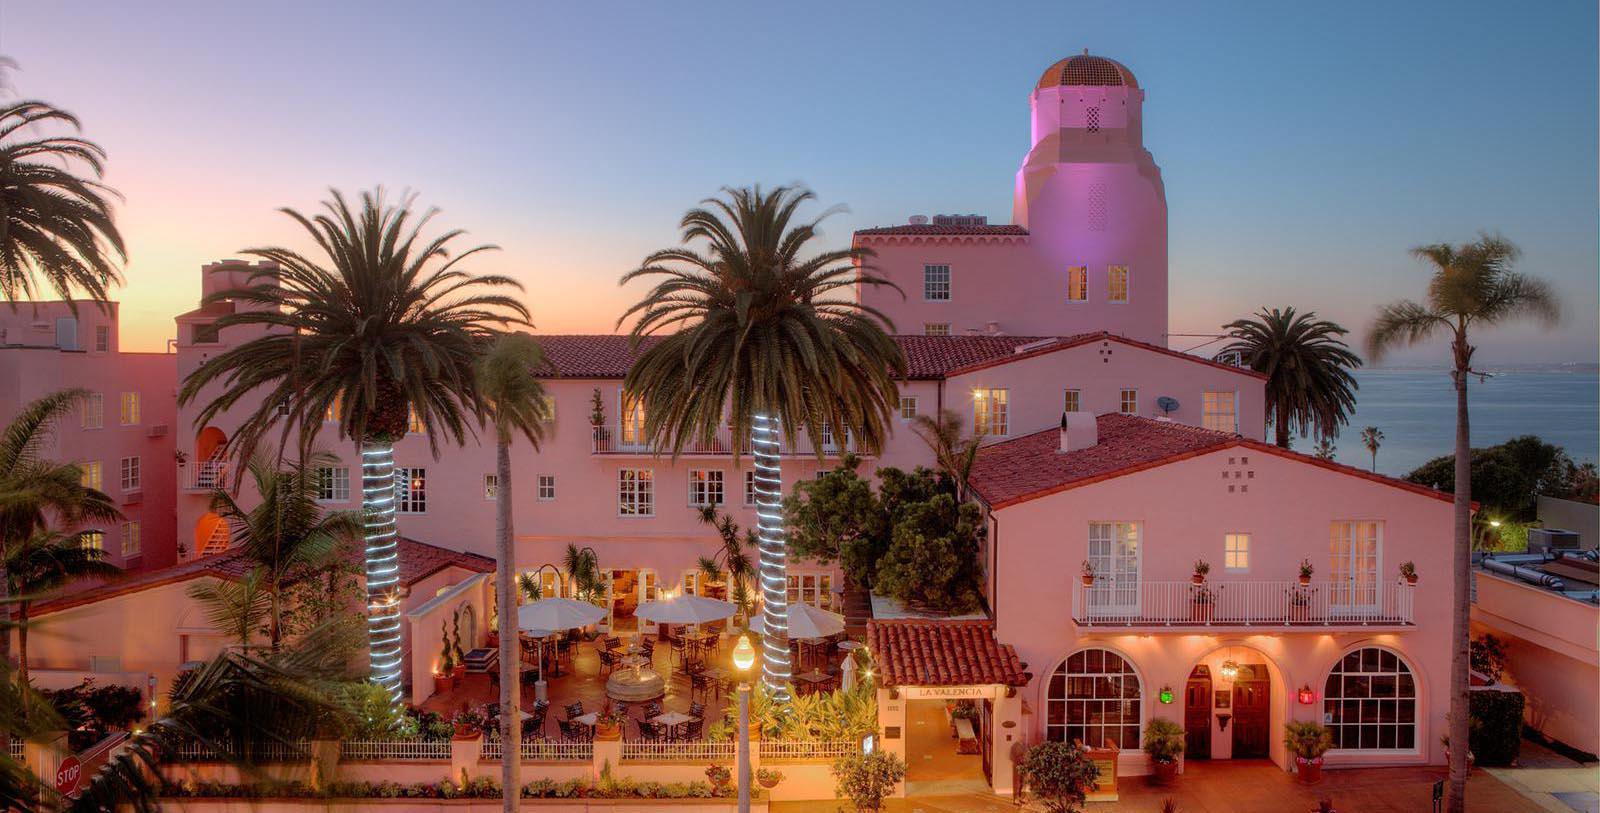 Image of Exterior at Night, La Valencia Hotel in La Jolla, Califronia, 1926, Member of Historic Hotels of America, Overview Video